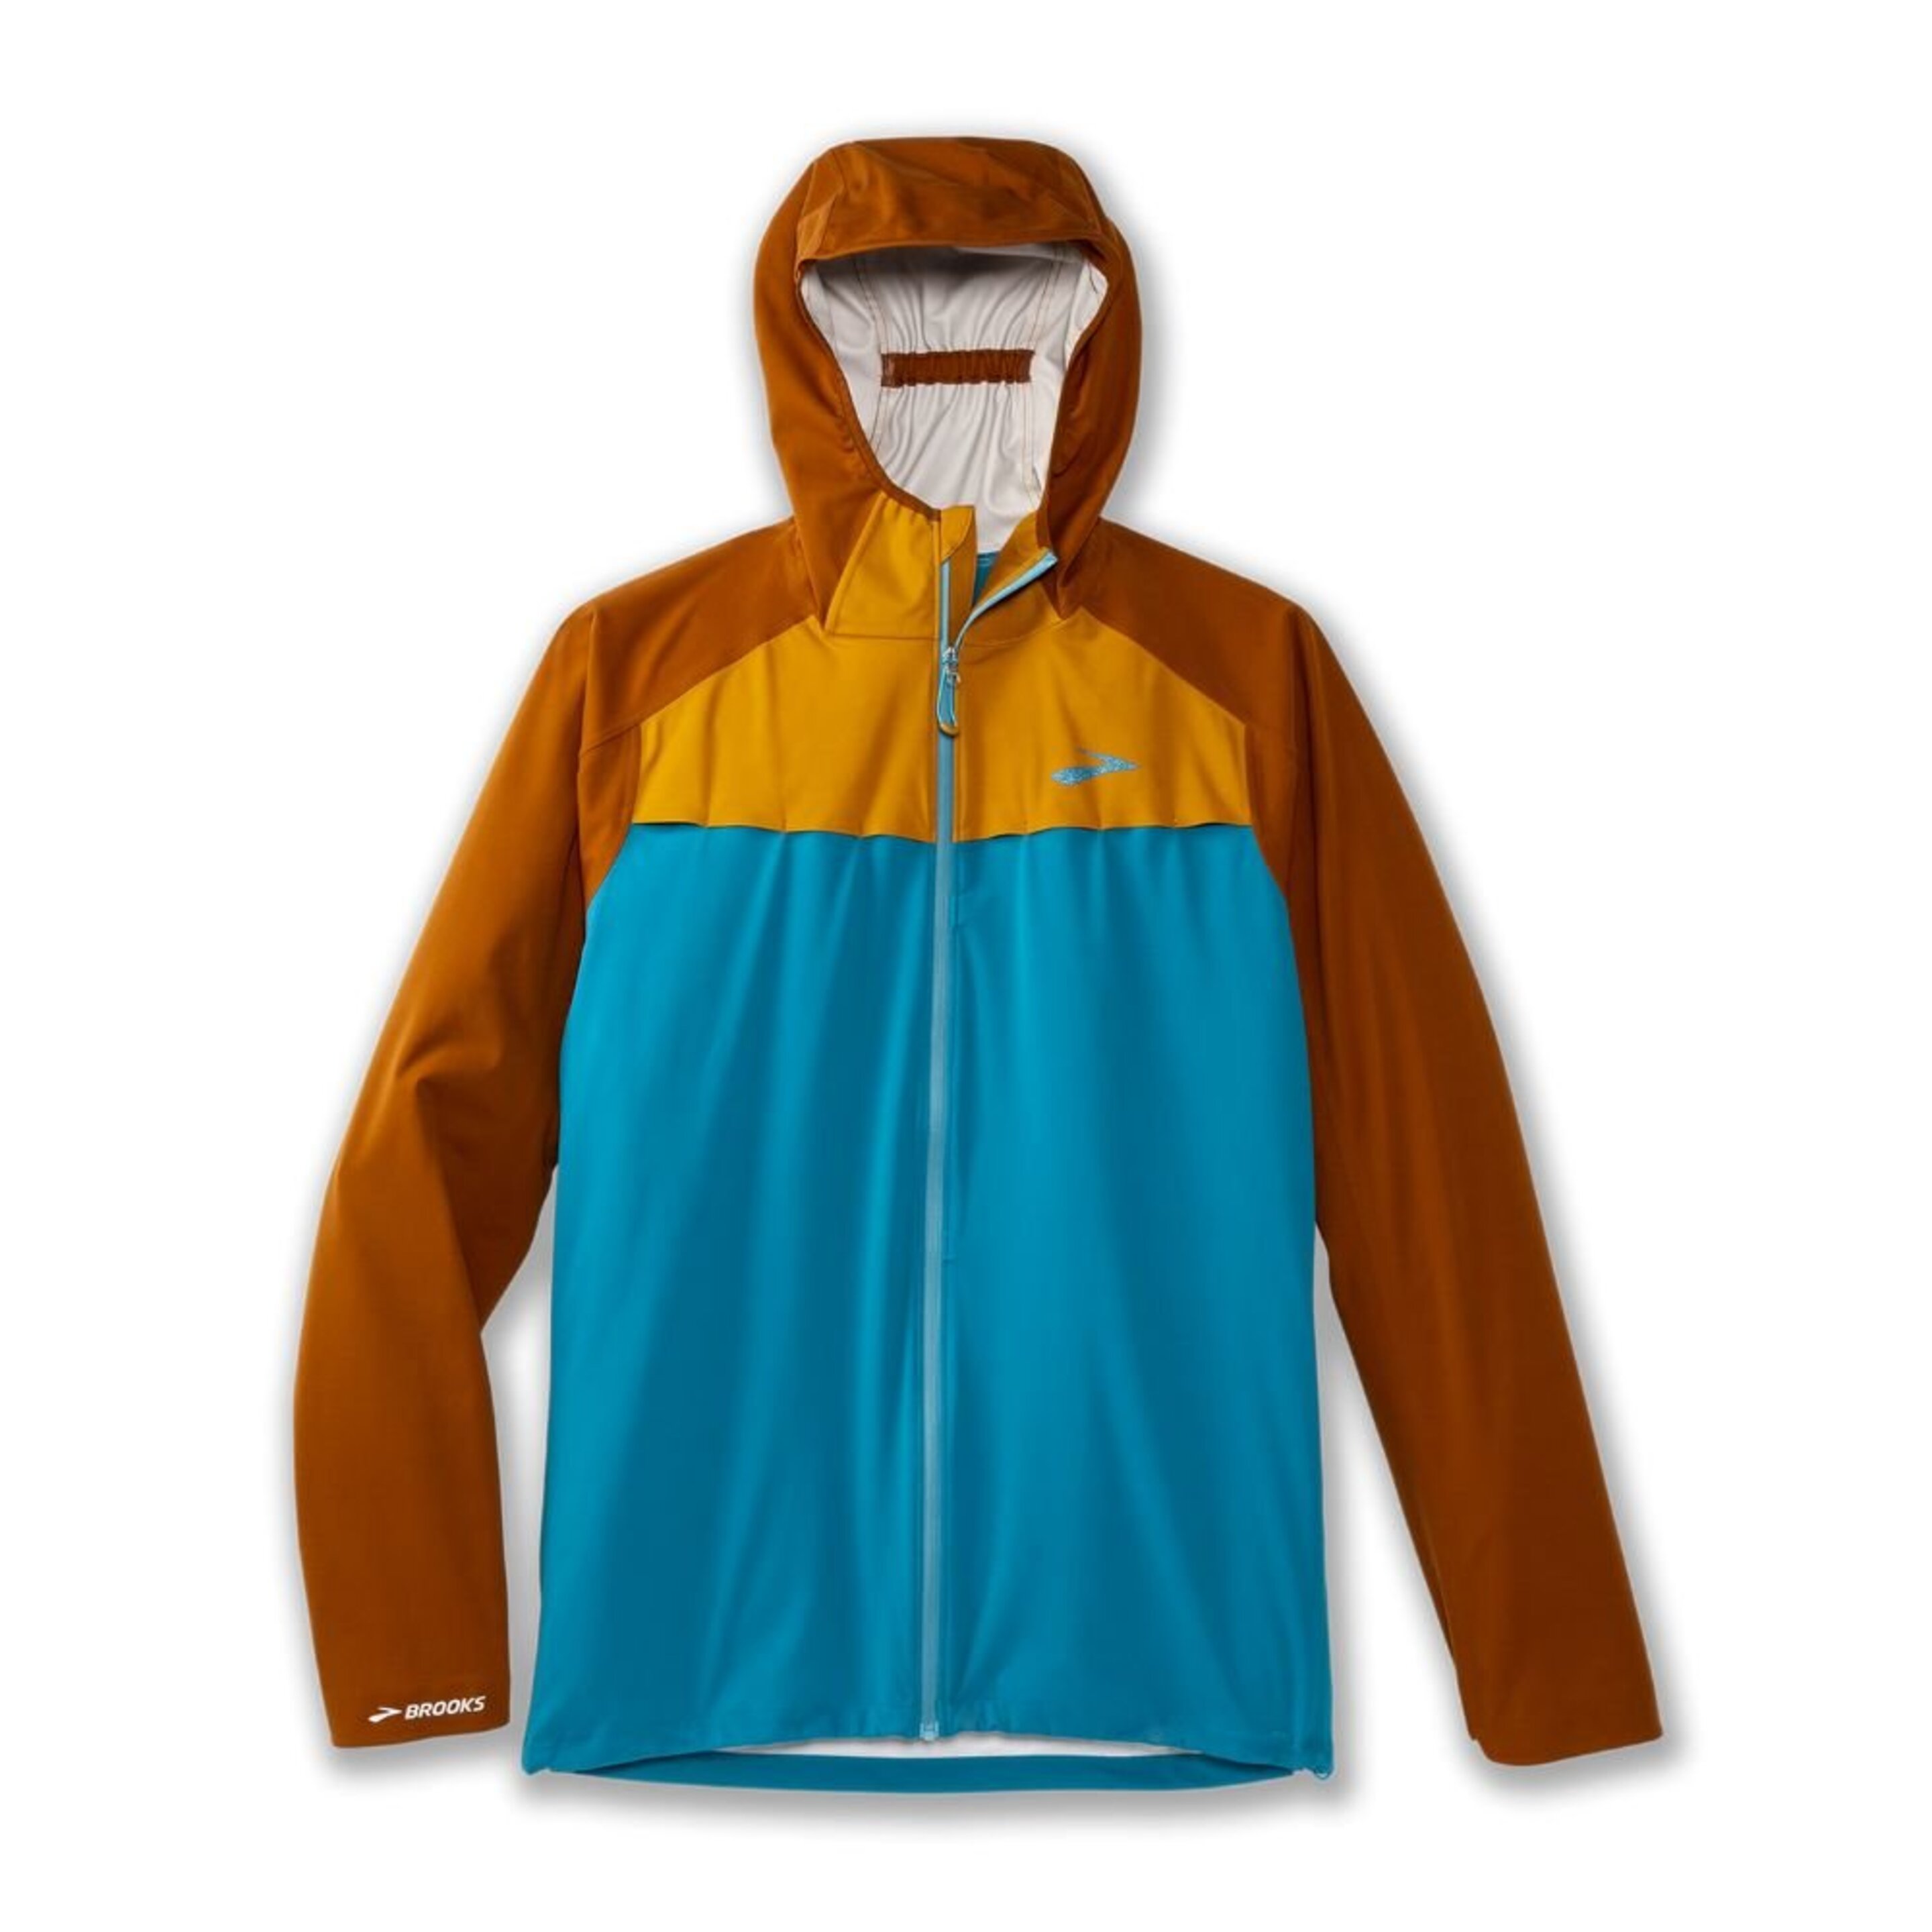 Chaqueta Impermeable High Point Brooks - multicolor - 